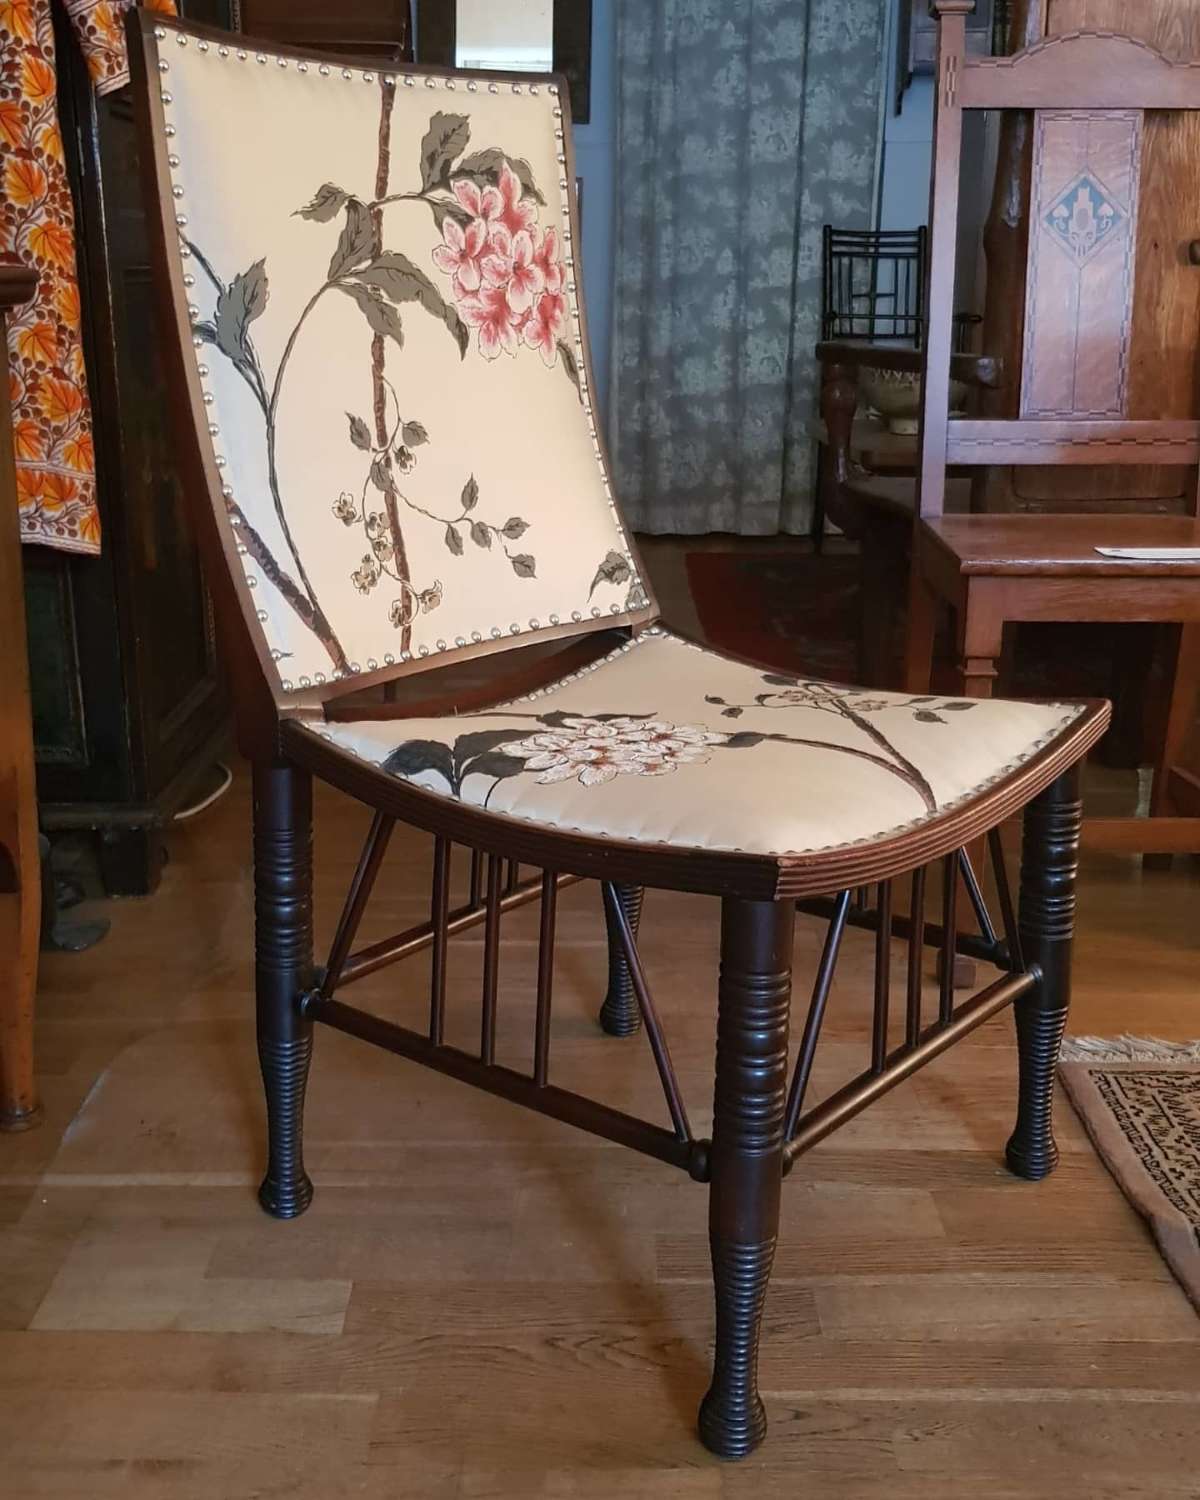 Rare Liberty & Co Aesthetic Movement Thebes chair